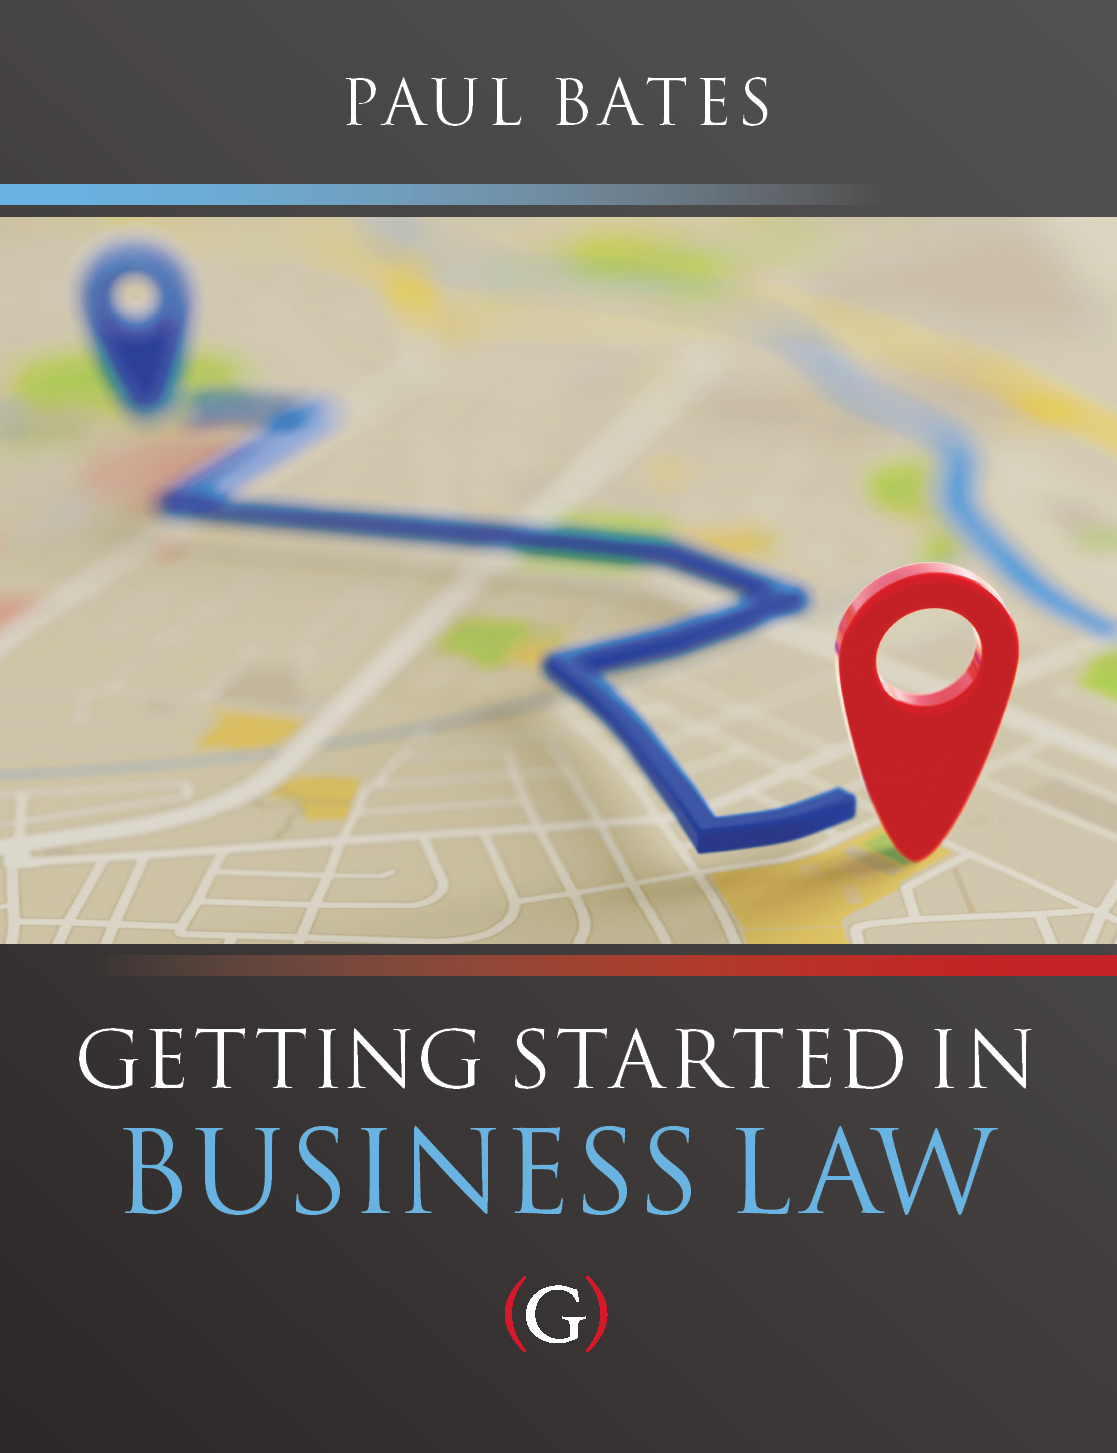 Getting Started in Business Law